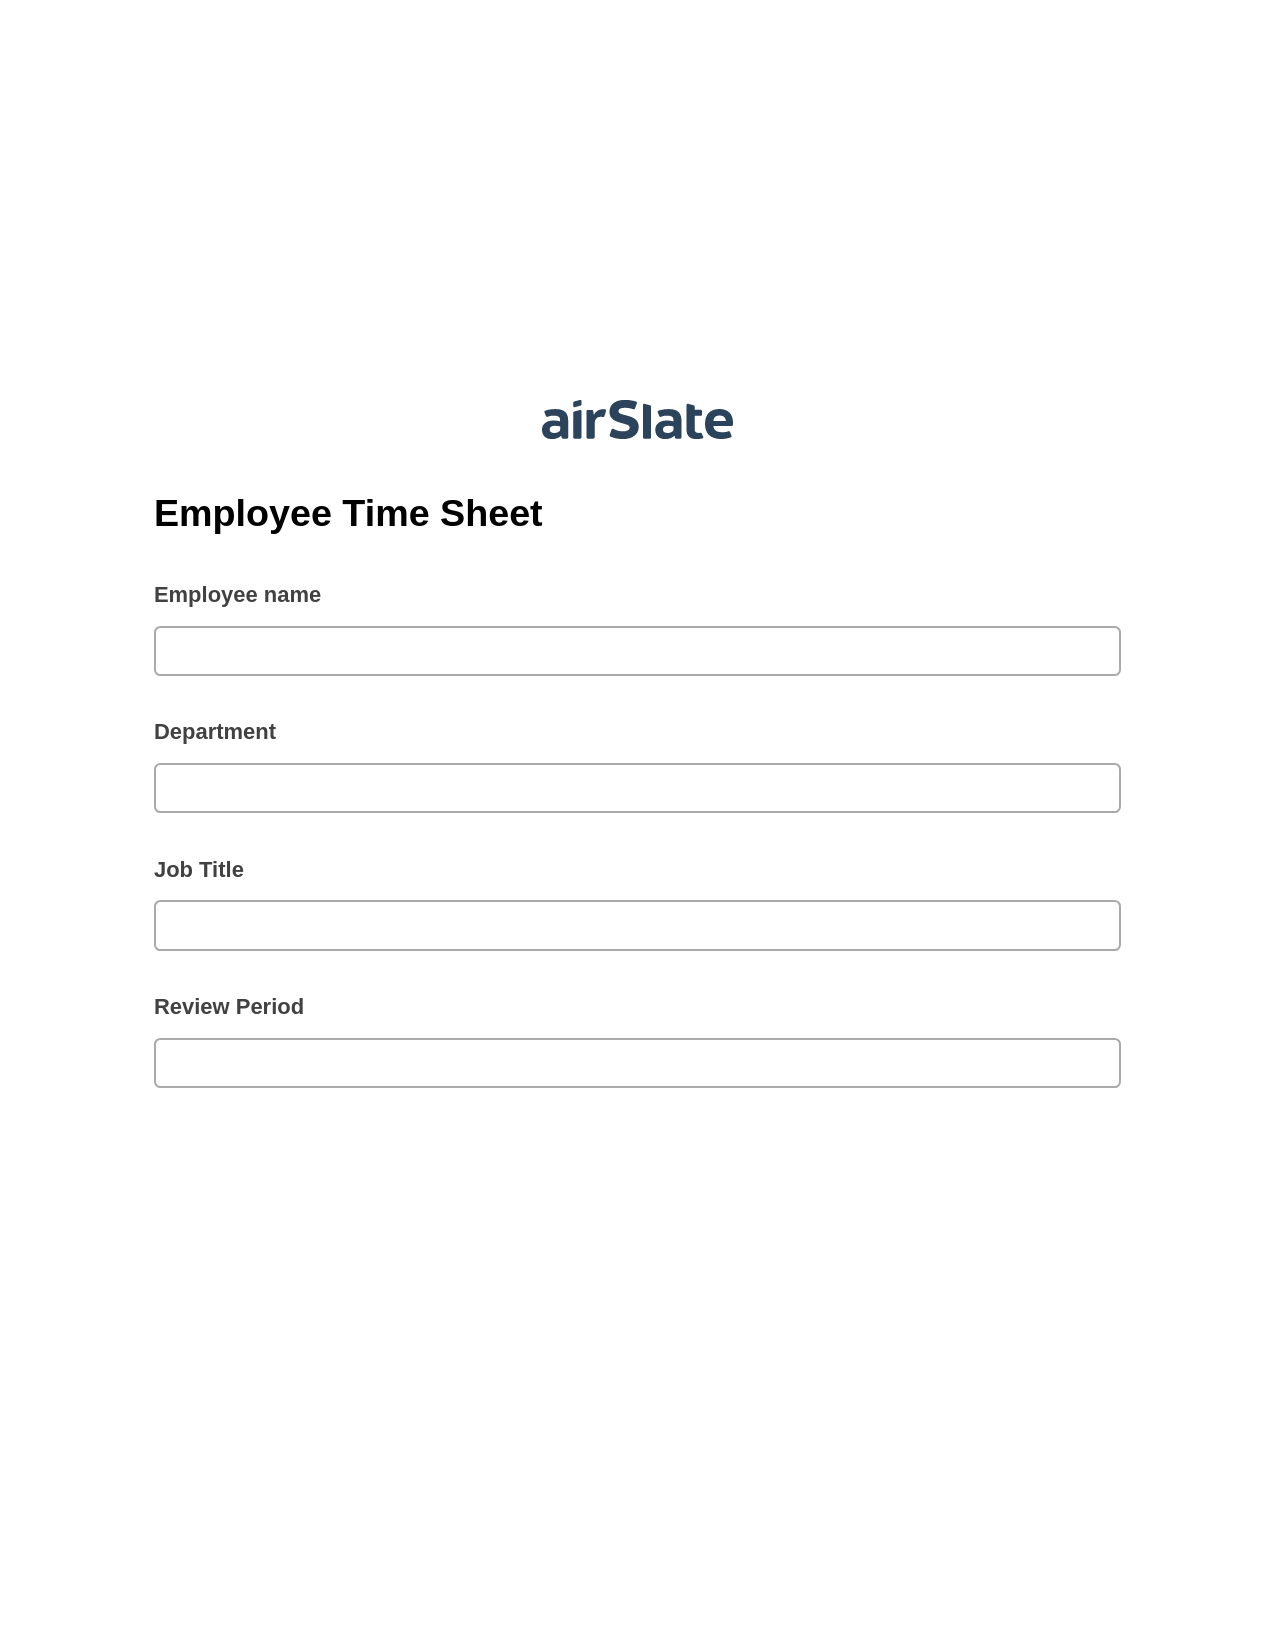 Employee Time Sheet Prefill from NetSuite records, Create Salesforce Records Bot, Archive to Google Drive Bot